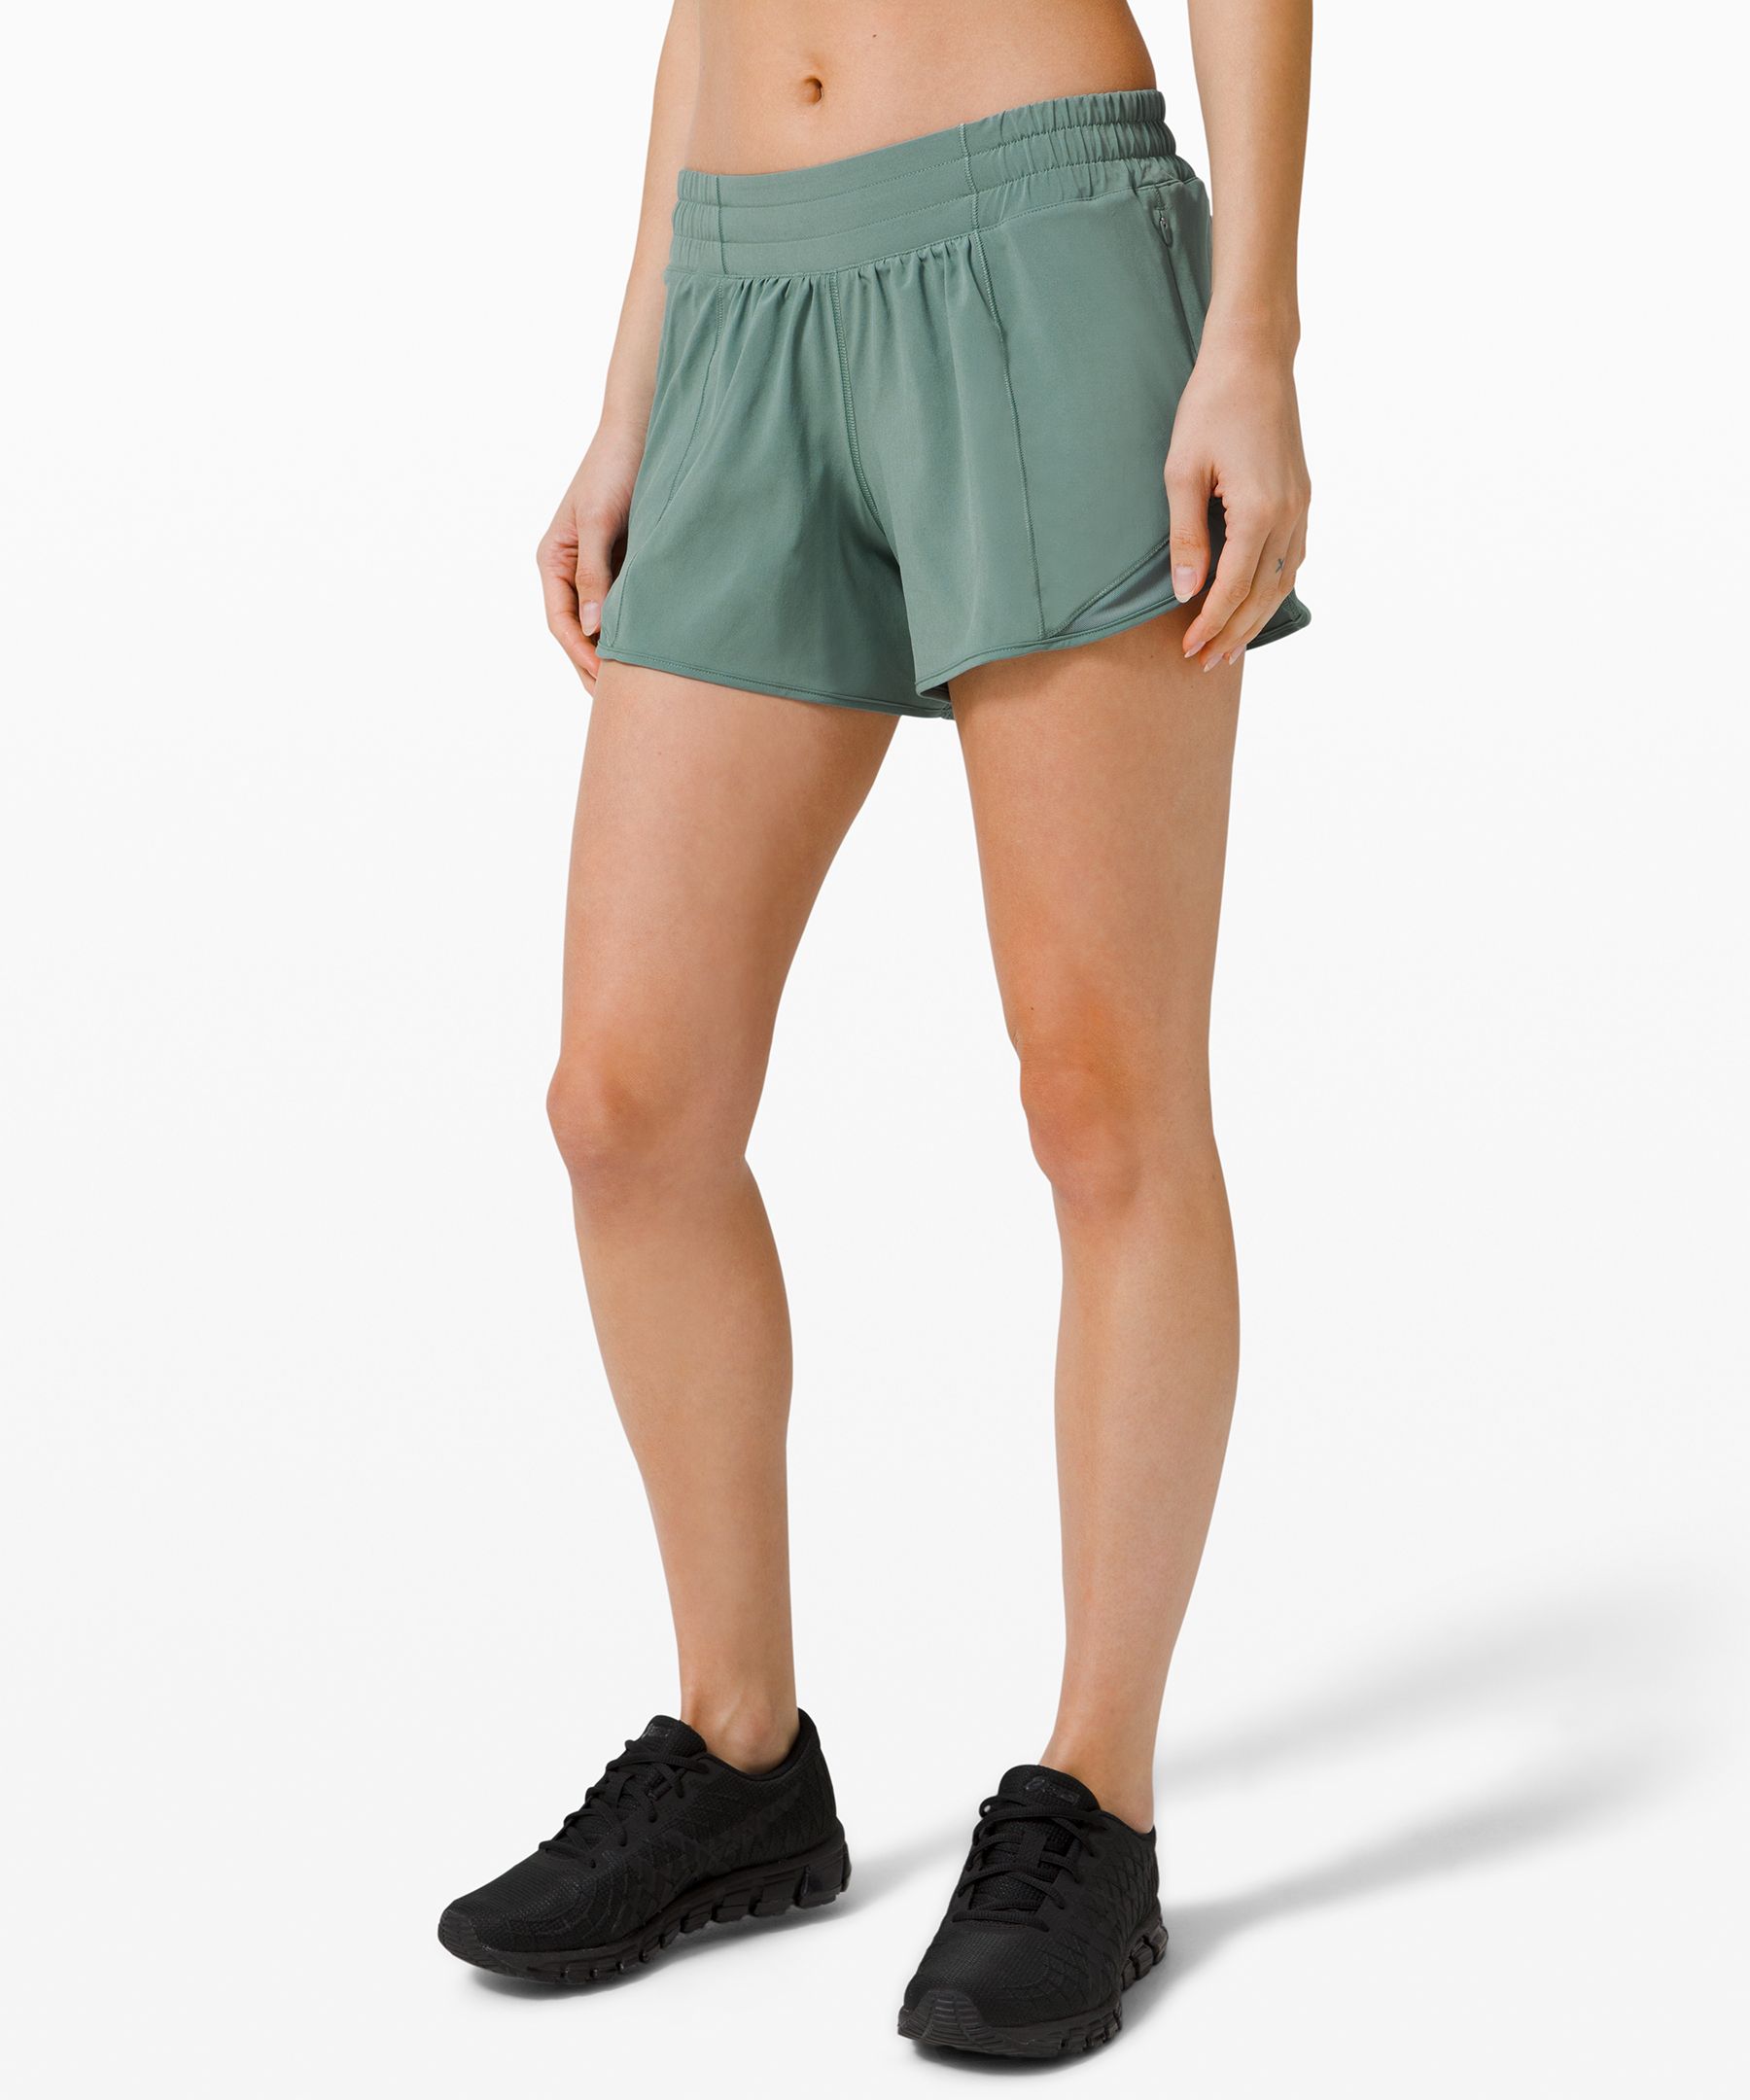 Lululemon Hotty Hot Shorts 4 Tall Blue - $24 (65% Off Retail) - From